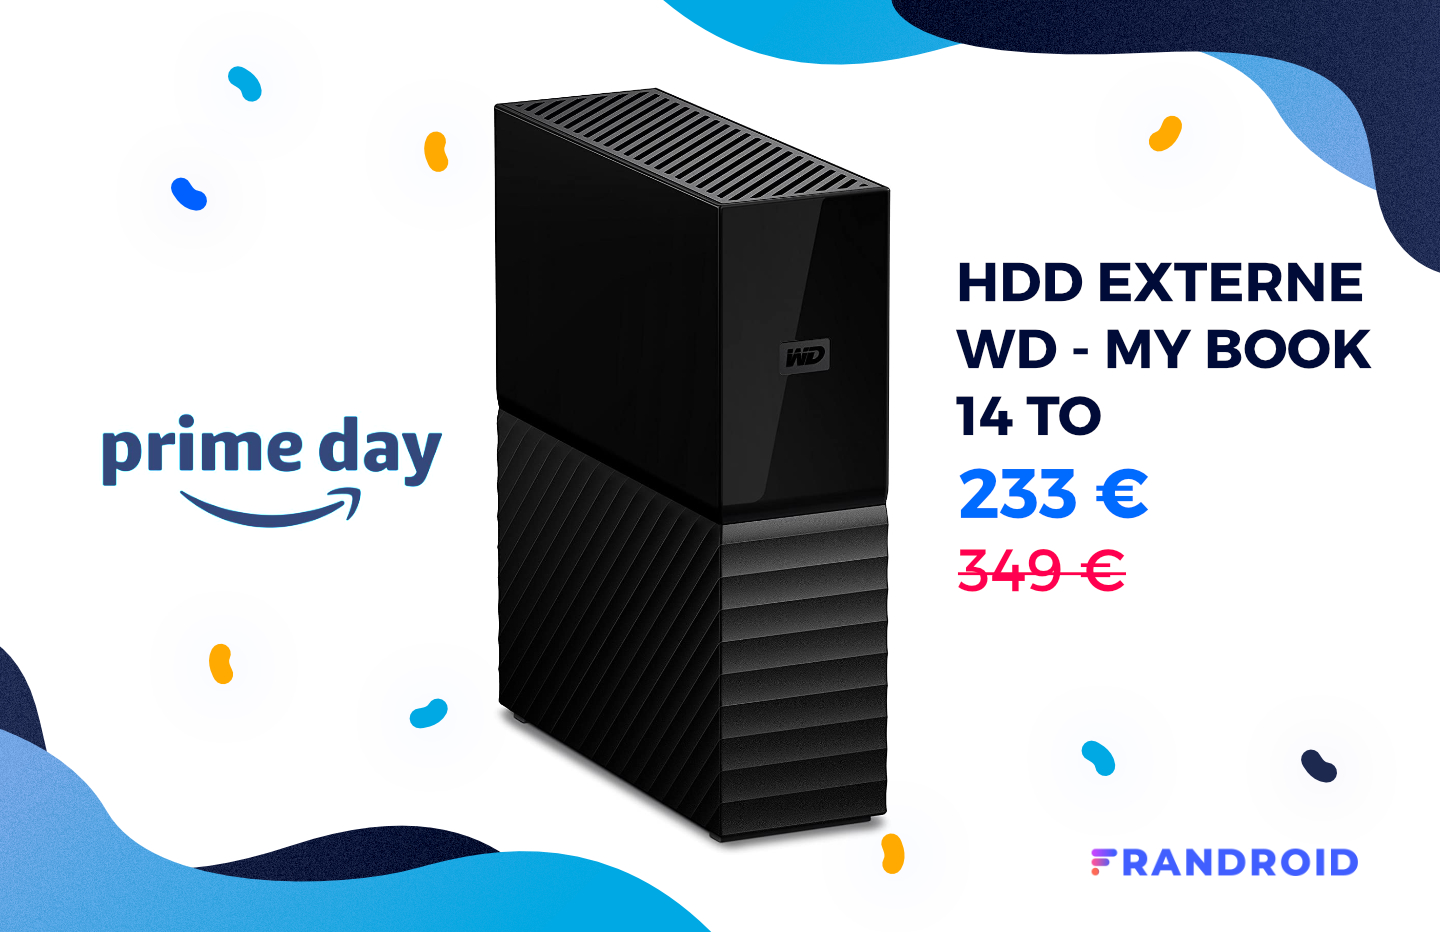 https://images.frandroid.com/wp-content/uploads/2020/10/disque-dur-externe-wd-my-book-14-to-prime-day-2020-new-price-2.jpg